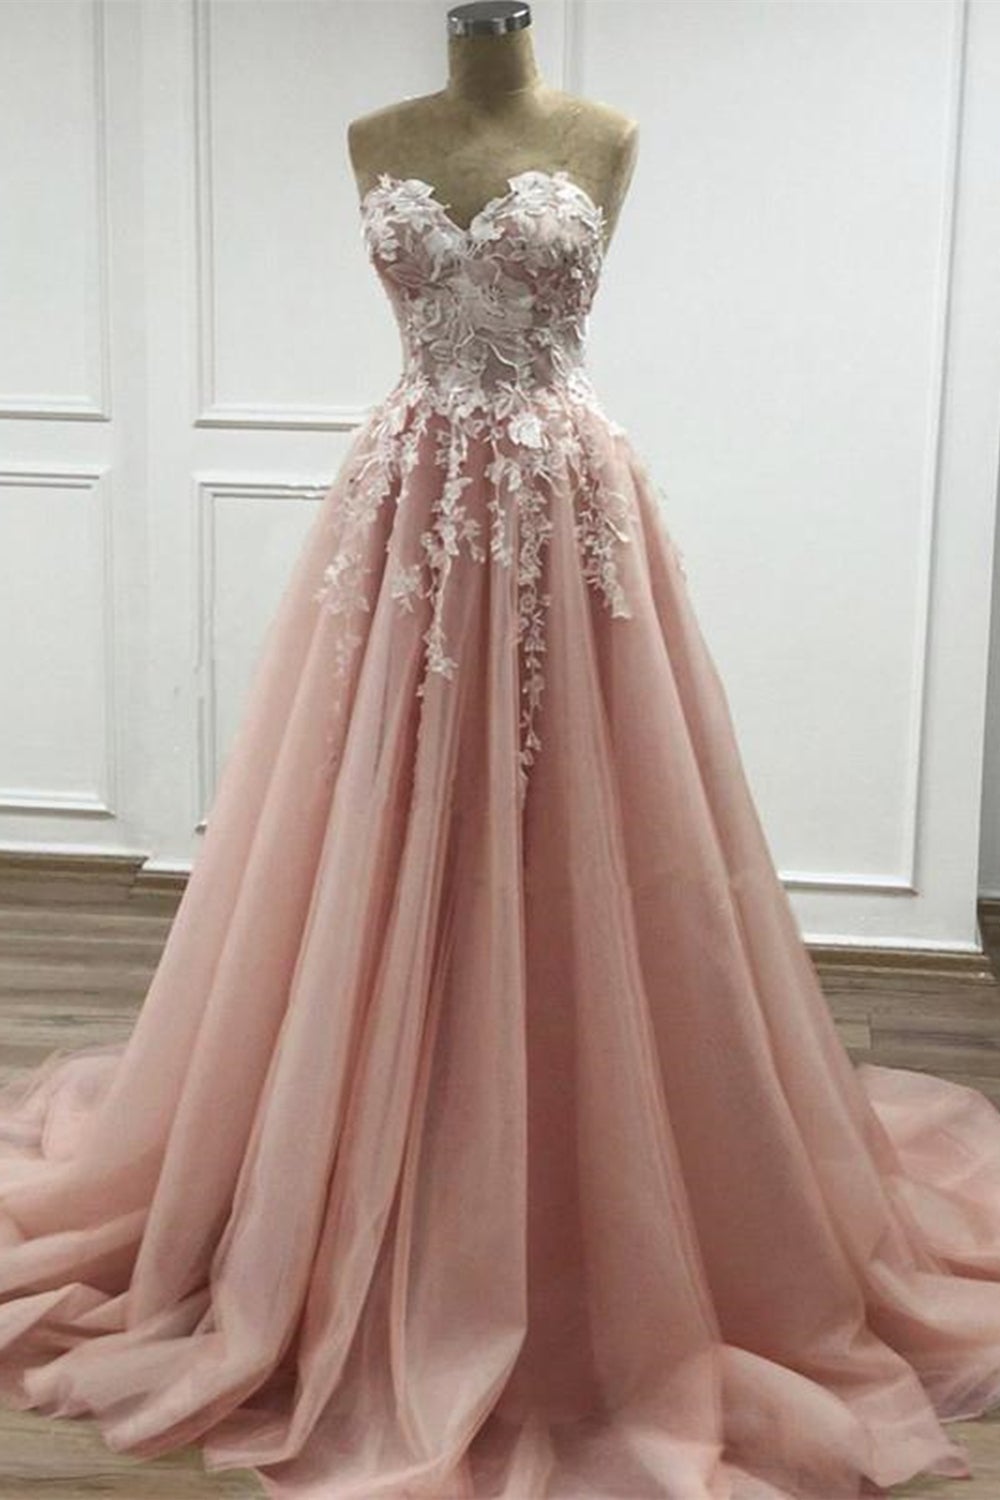 Bridesmaids Dresses Gold, Strapless Sweetheart Neck Pink Lace Appliques Long Prom Dress,Floral Formal Dress,Fashion Evening Dresses